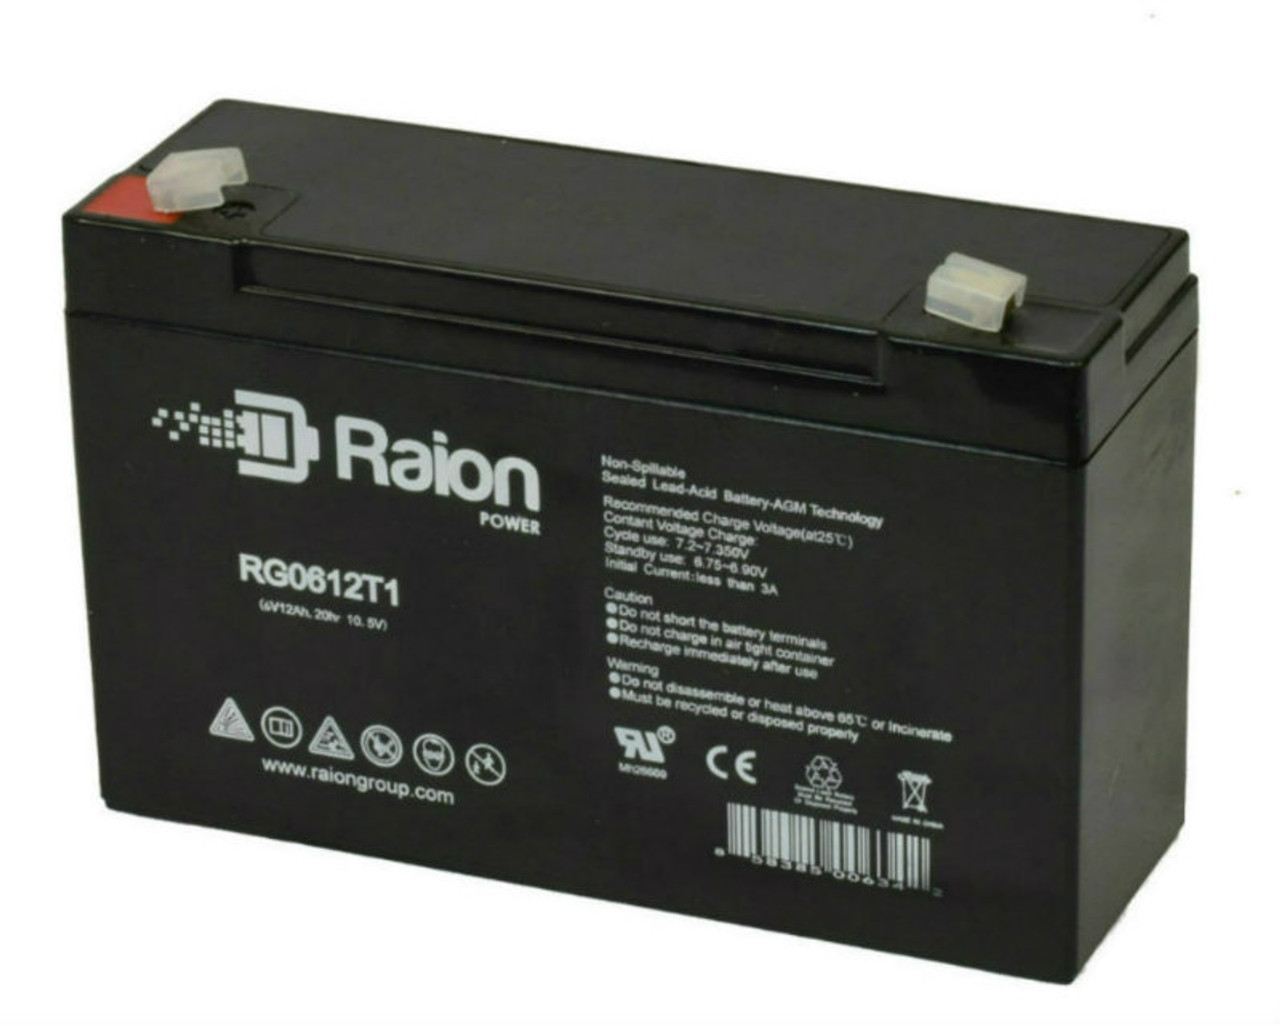 Raion Power RG06120T1 Replacement 6V 12Ah Emergency Light Battery for Dyna-Ray S18169